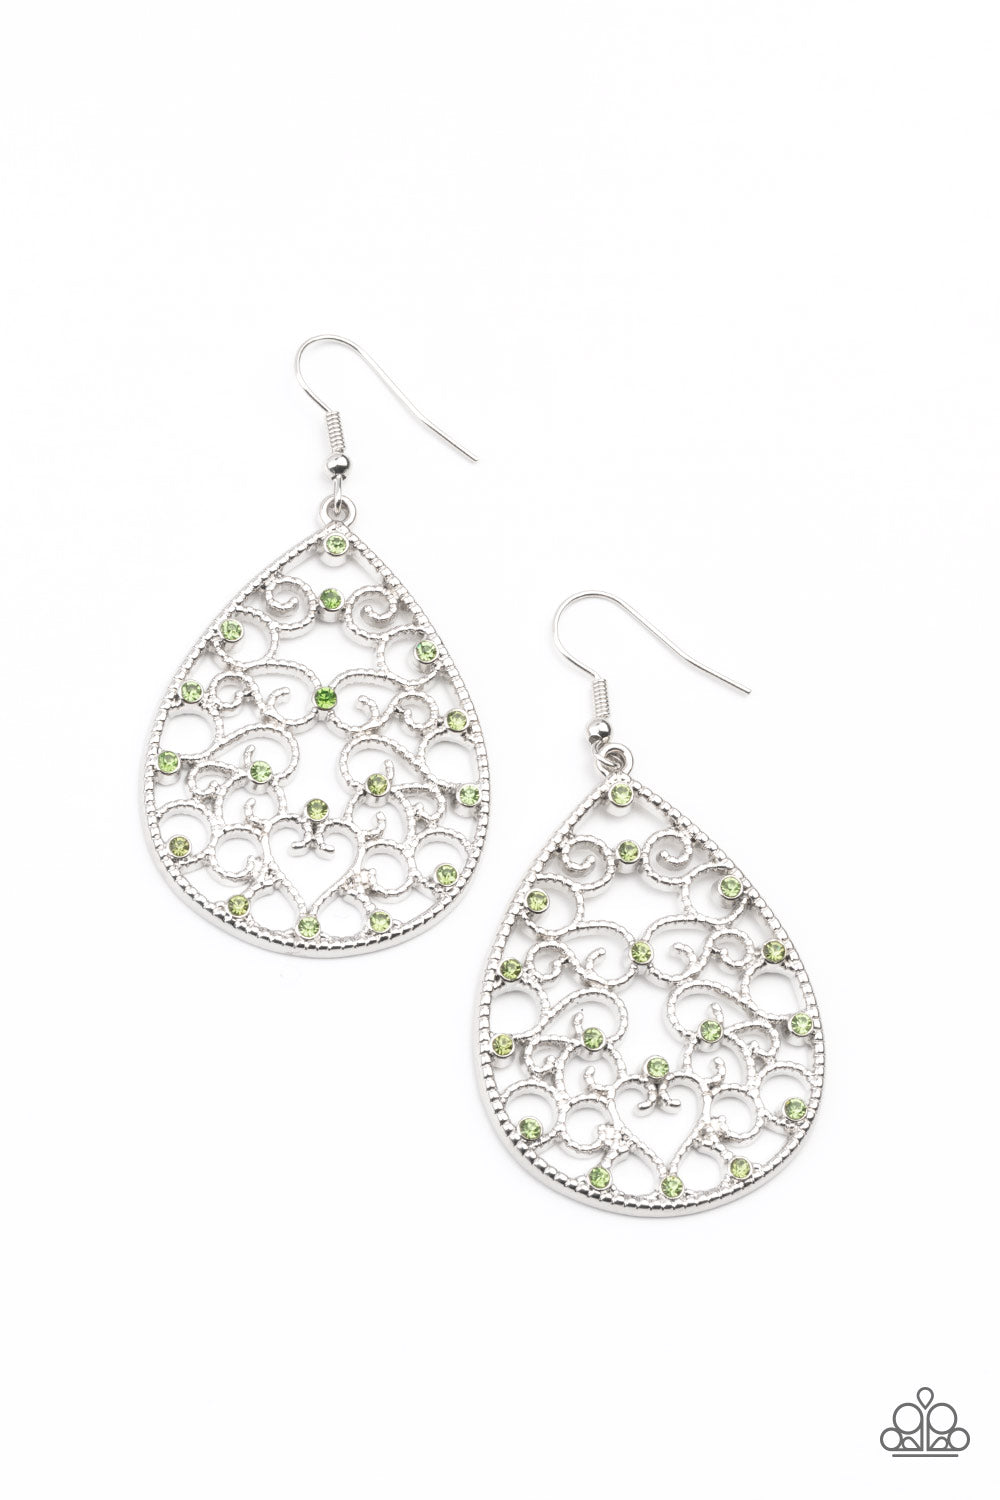 Paparazzi Accessories - Dotted with dainty green rhinestones, studded silver filigree vines across the front of a silver teardrop frame for an enchanting look.